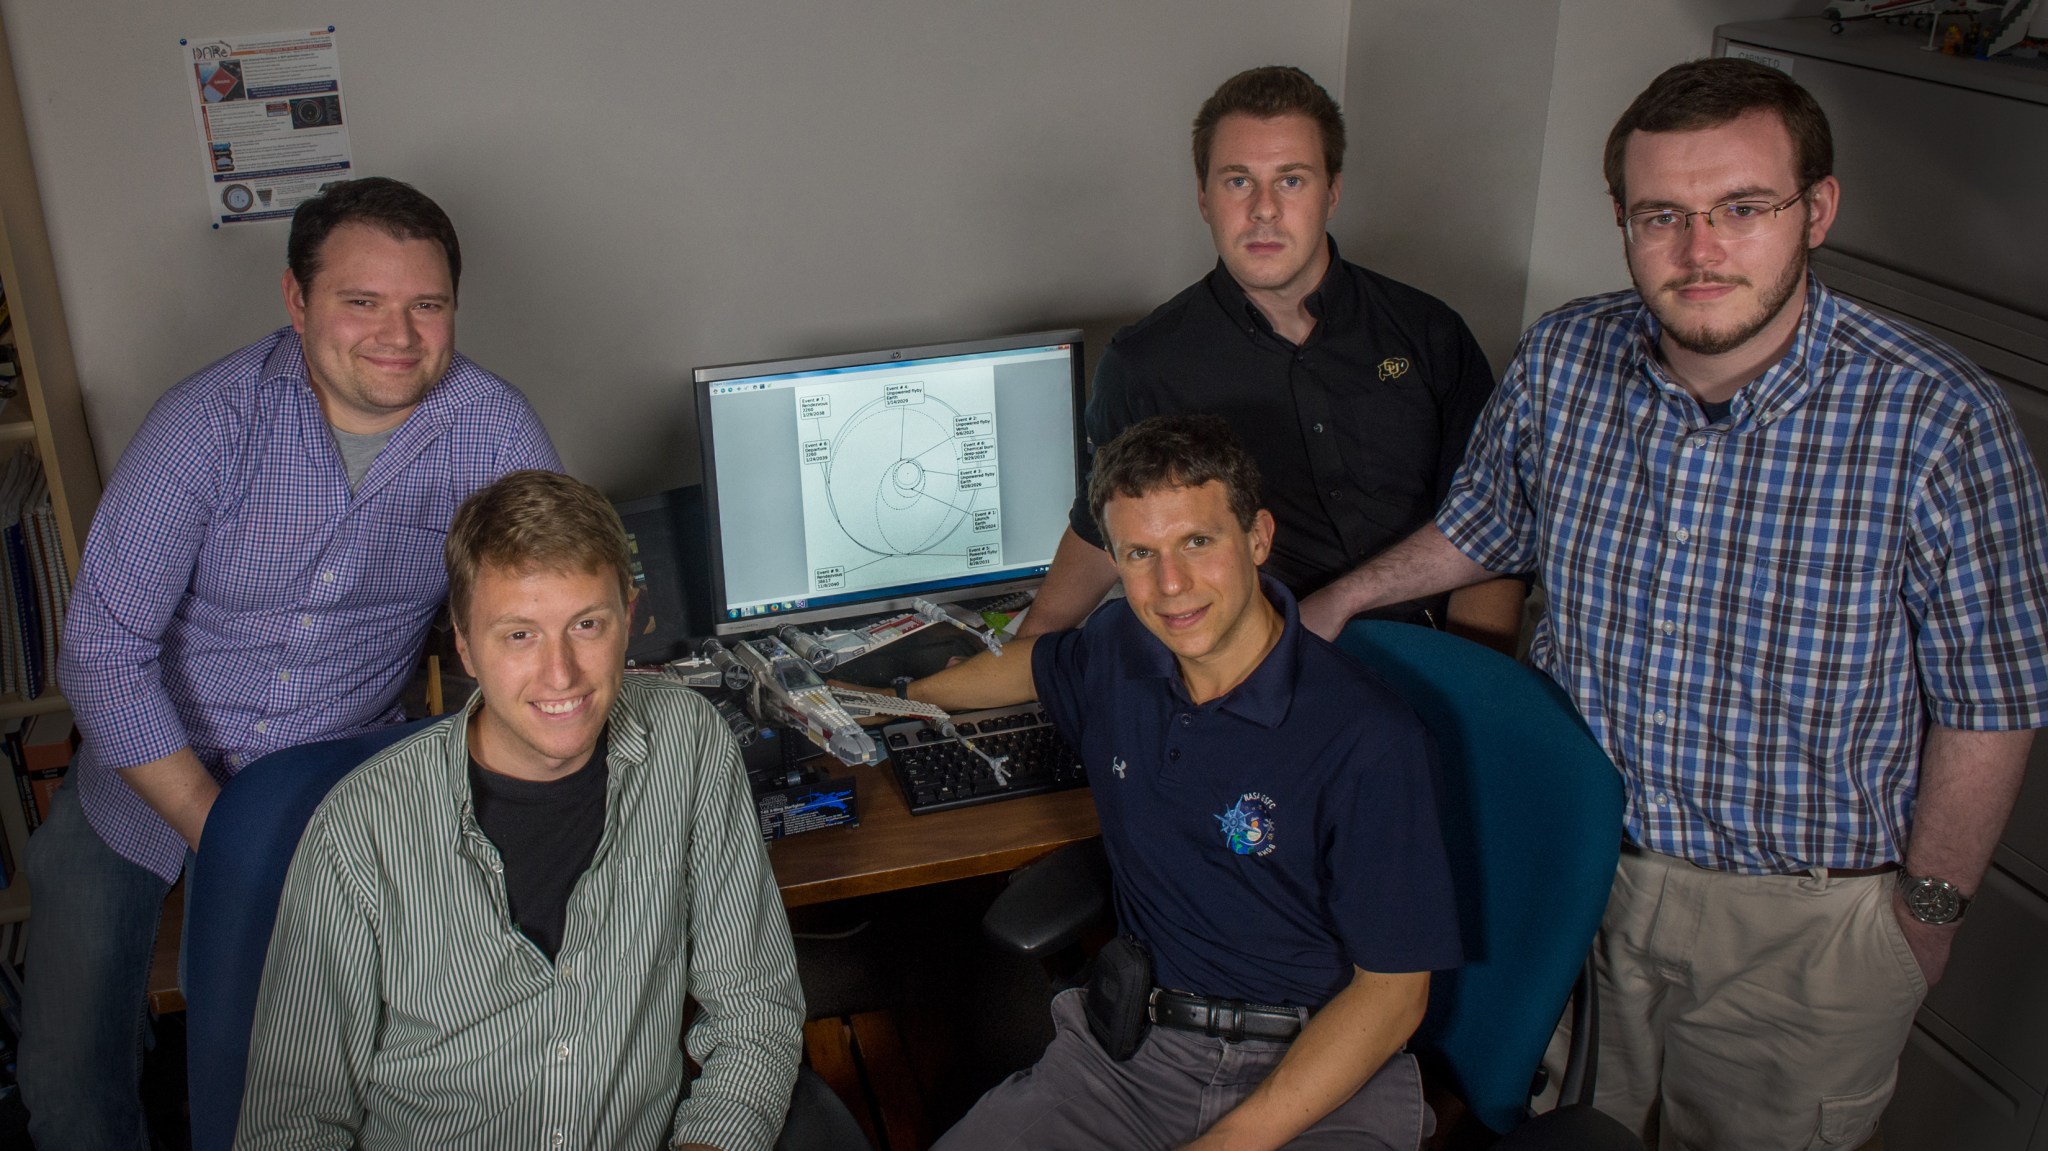 Team that help enhance a fully automated tool for determining orbital trajectories and spacecraft design. 